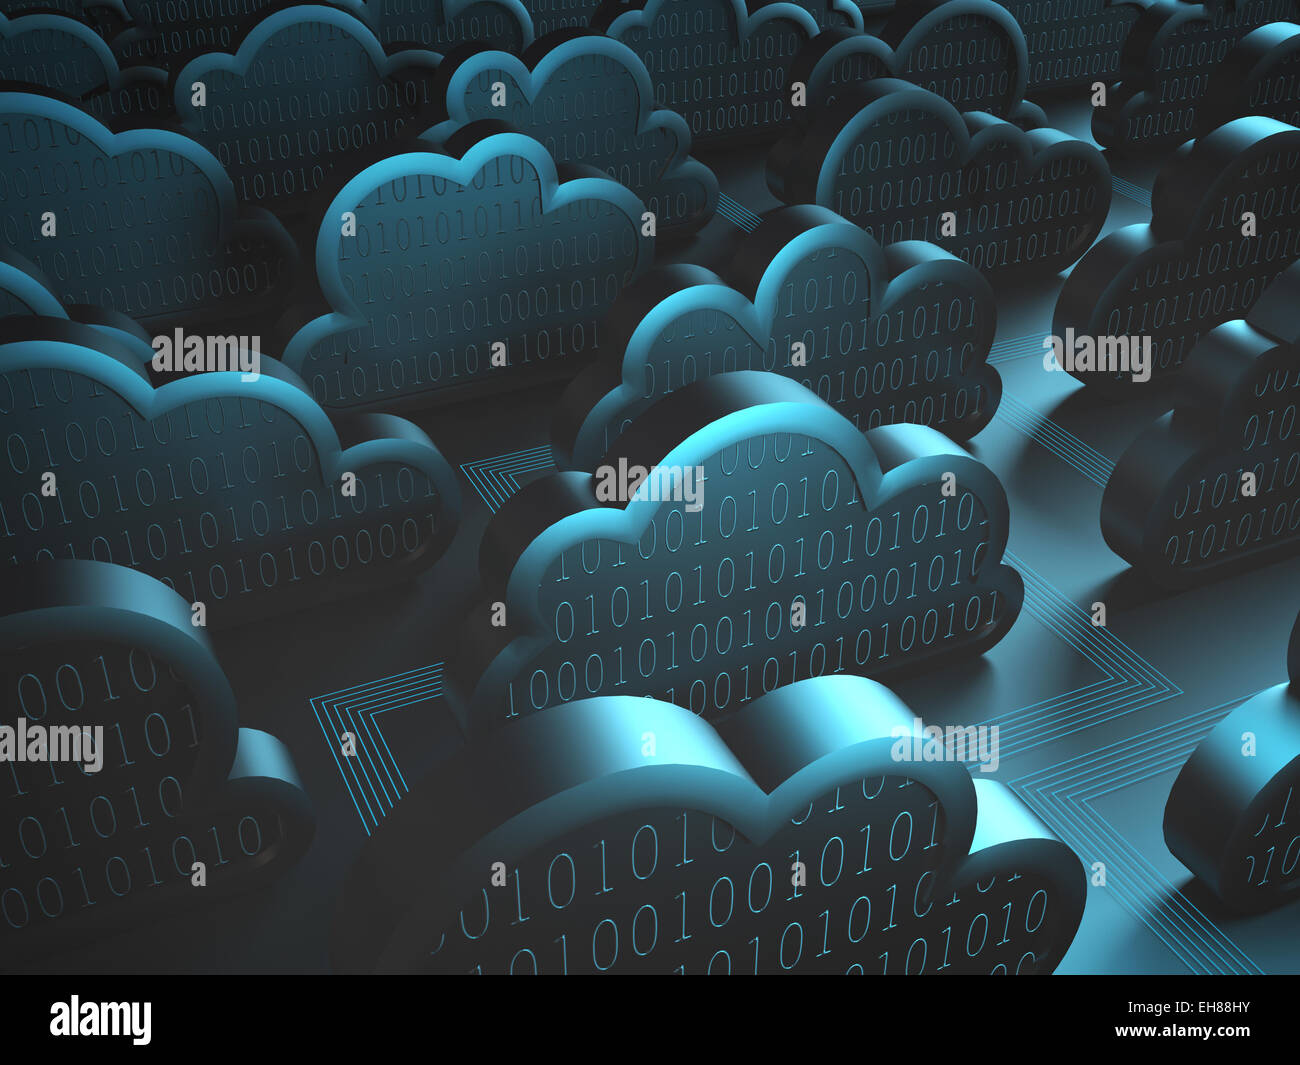 Image background concept of cloud computing. Stock Photo